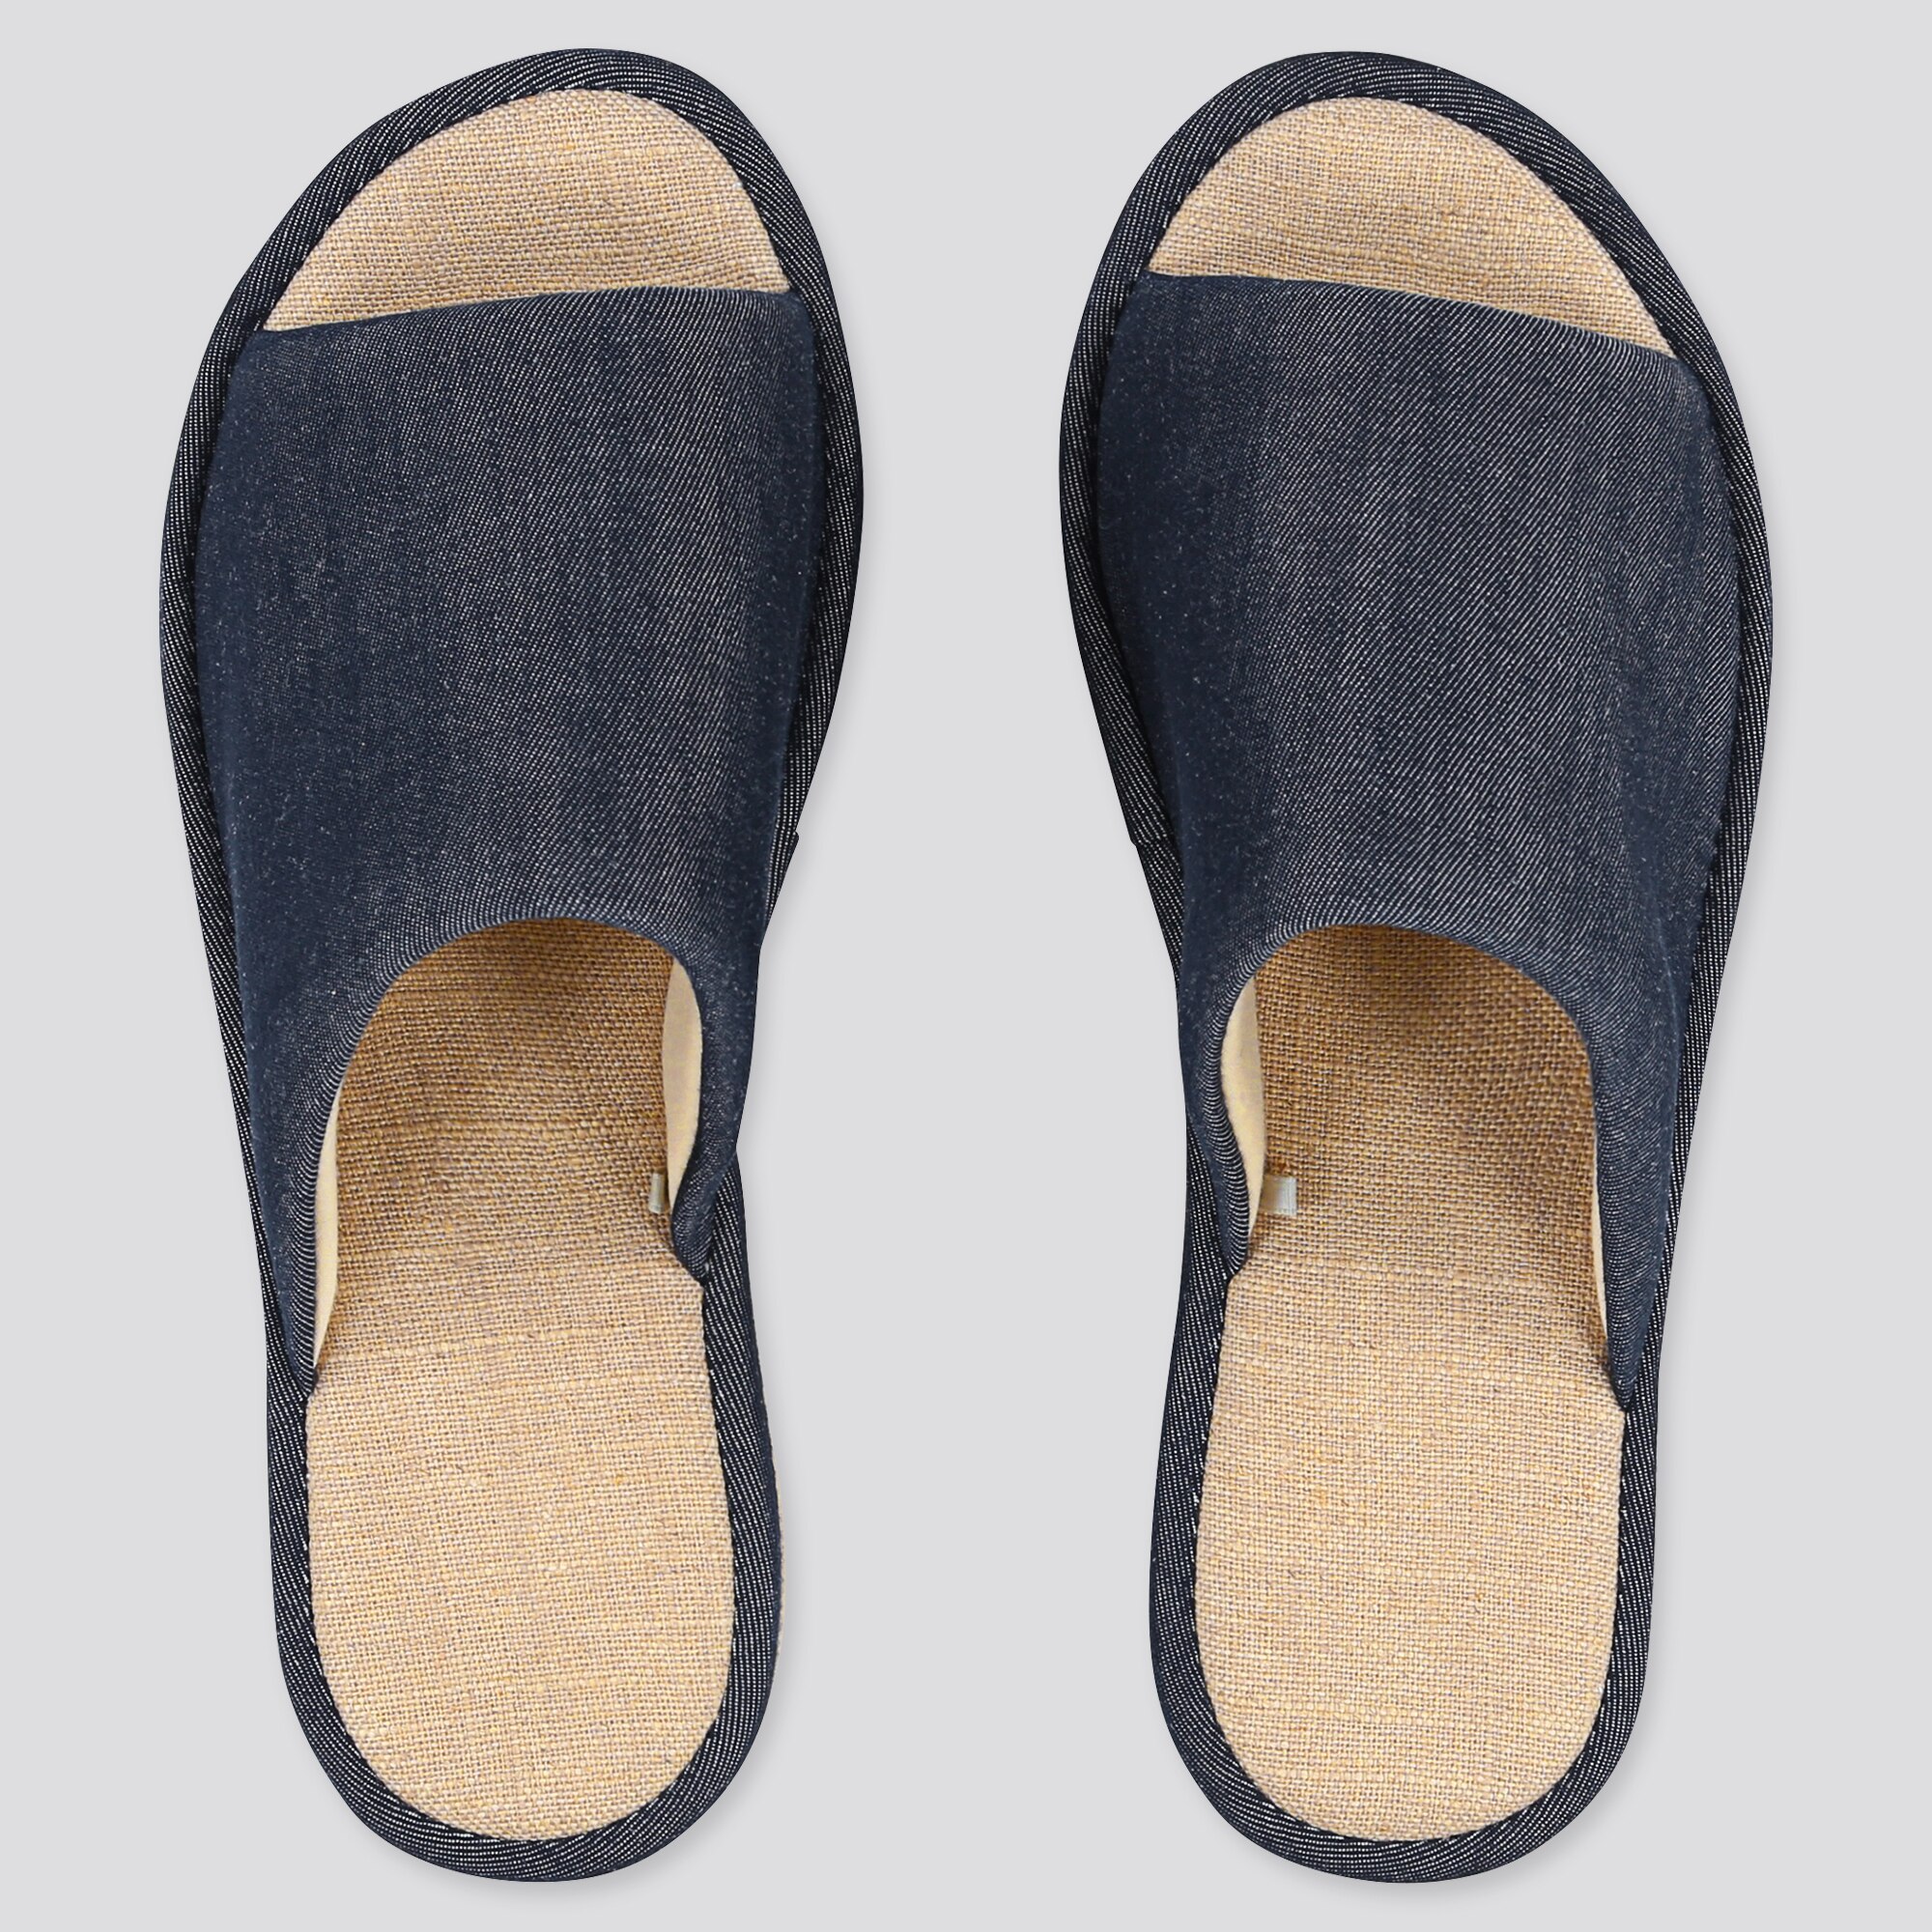 CHAMBRAY SLIPPERS | UNIQLO US